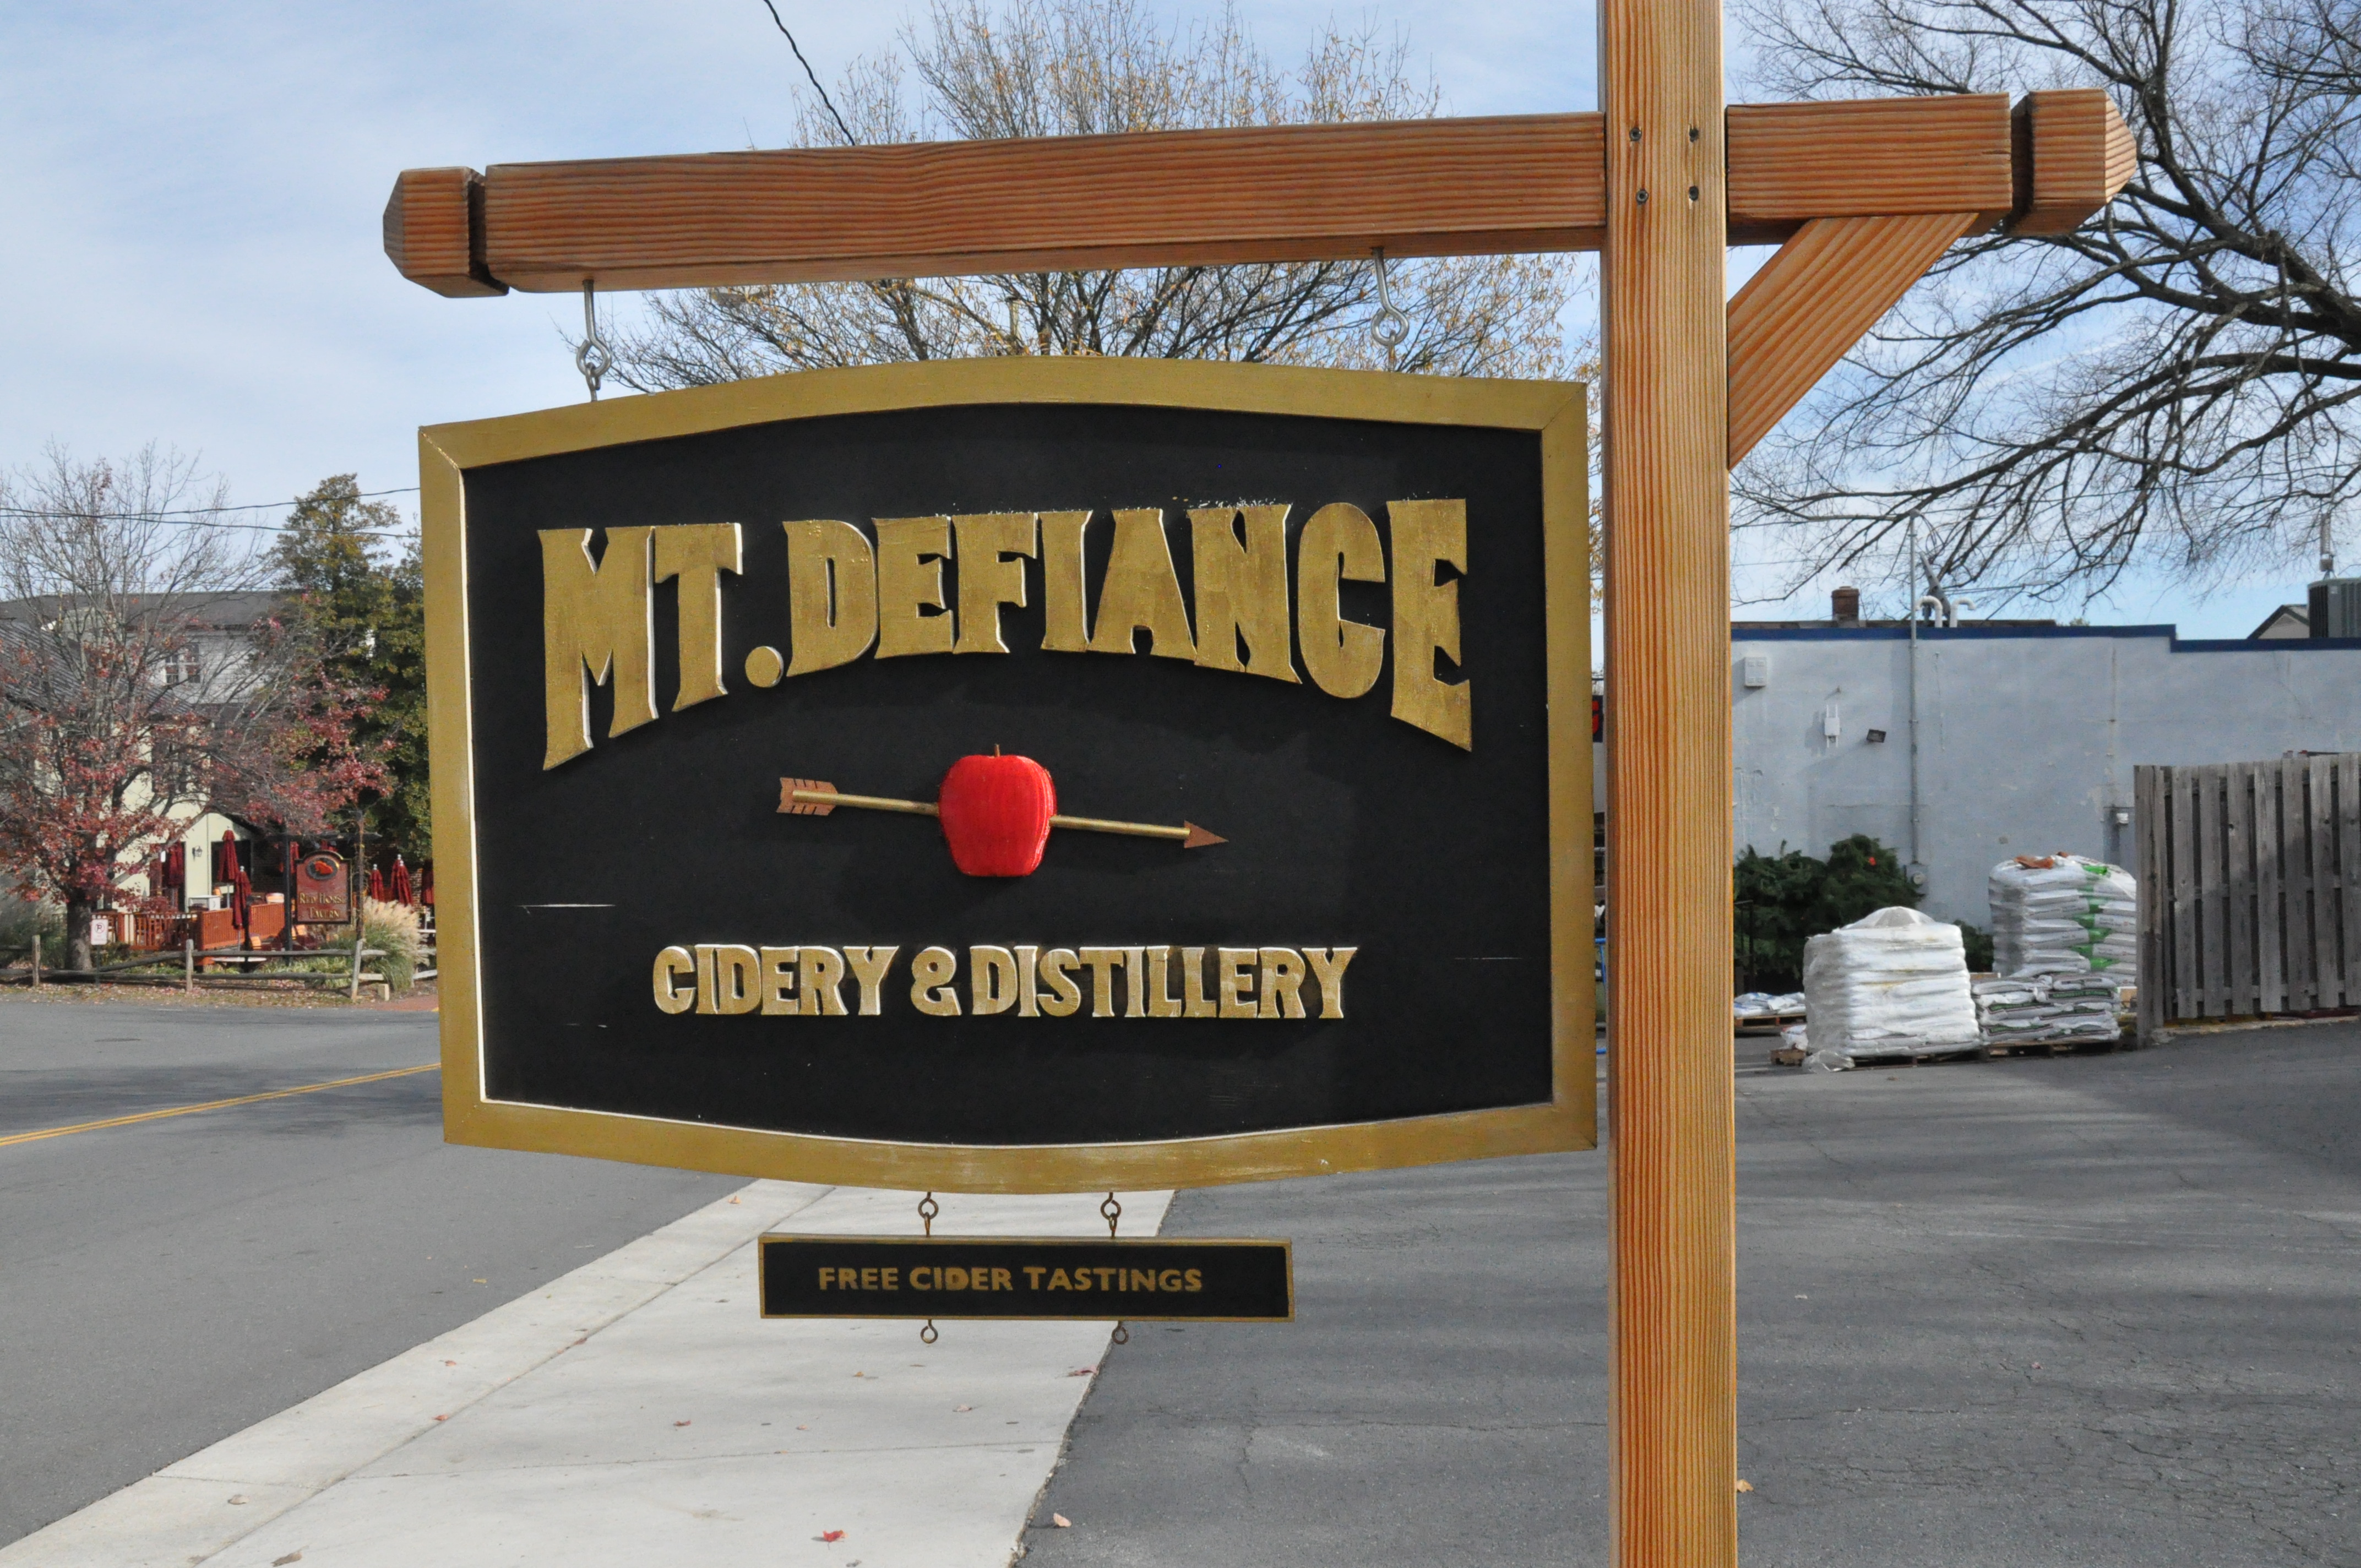 From Afghanistan to apple orchards: Former adviser opens cidery